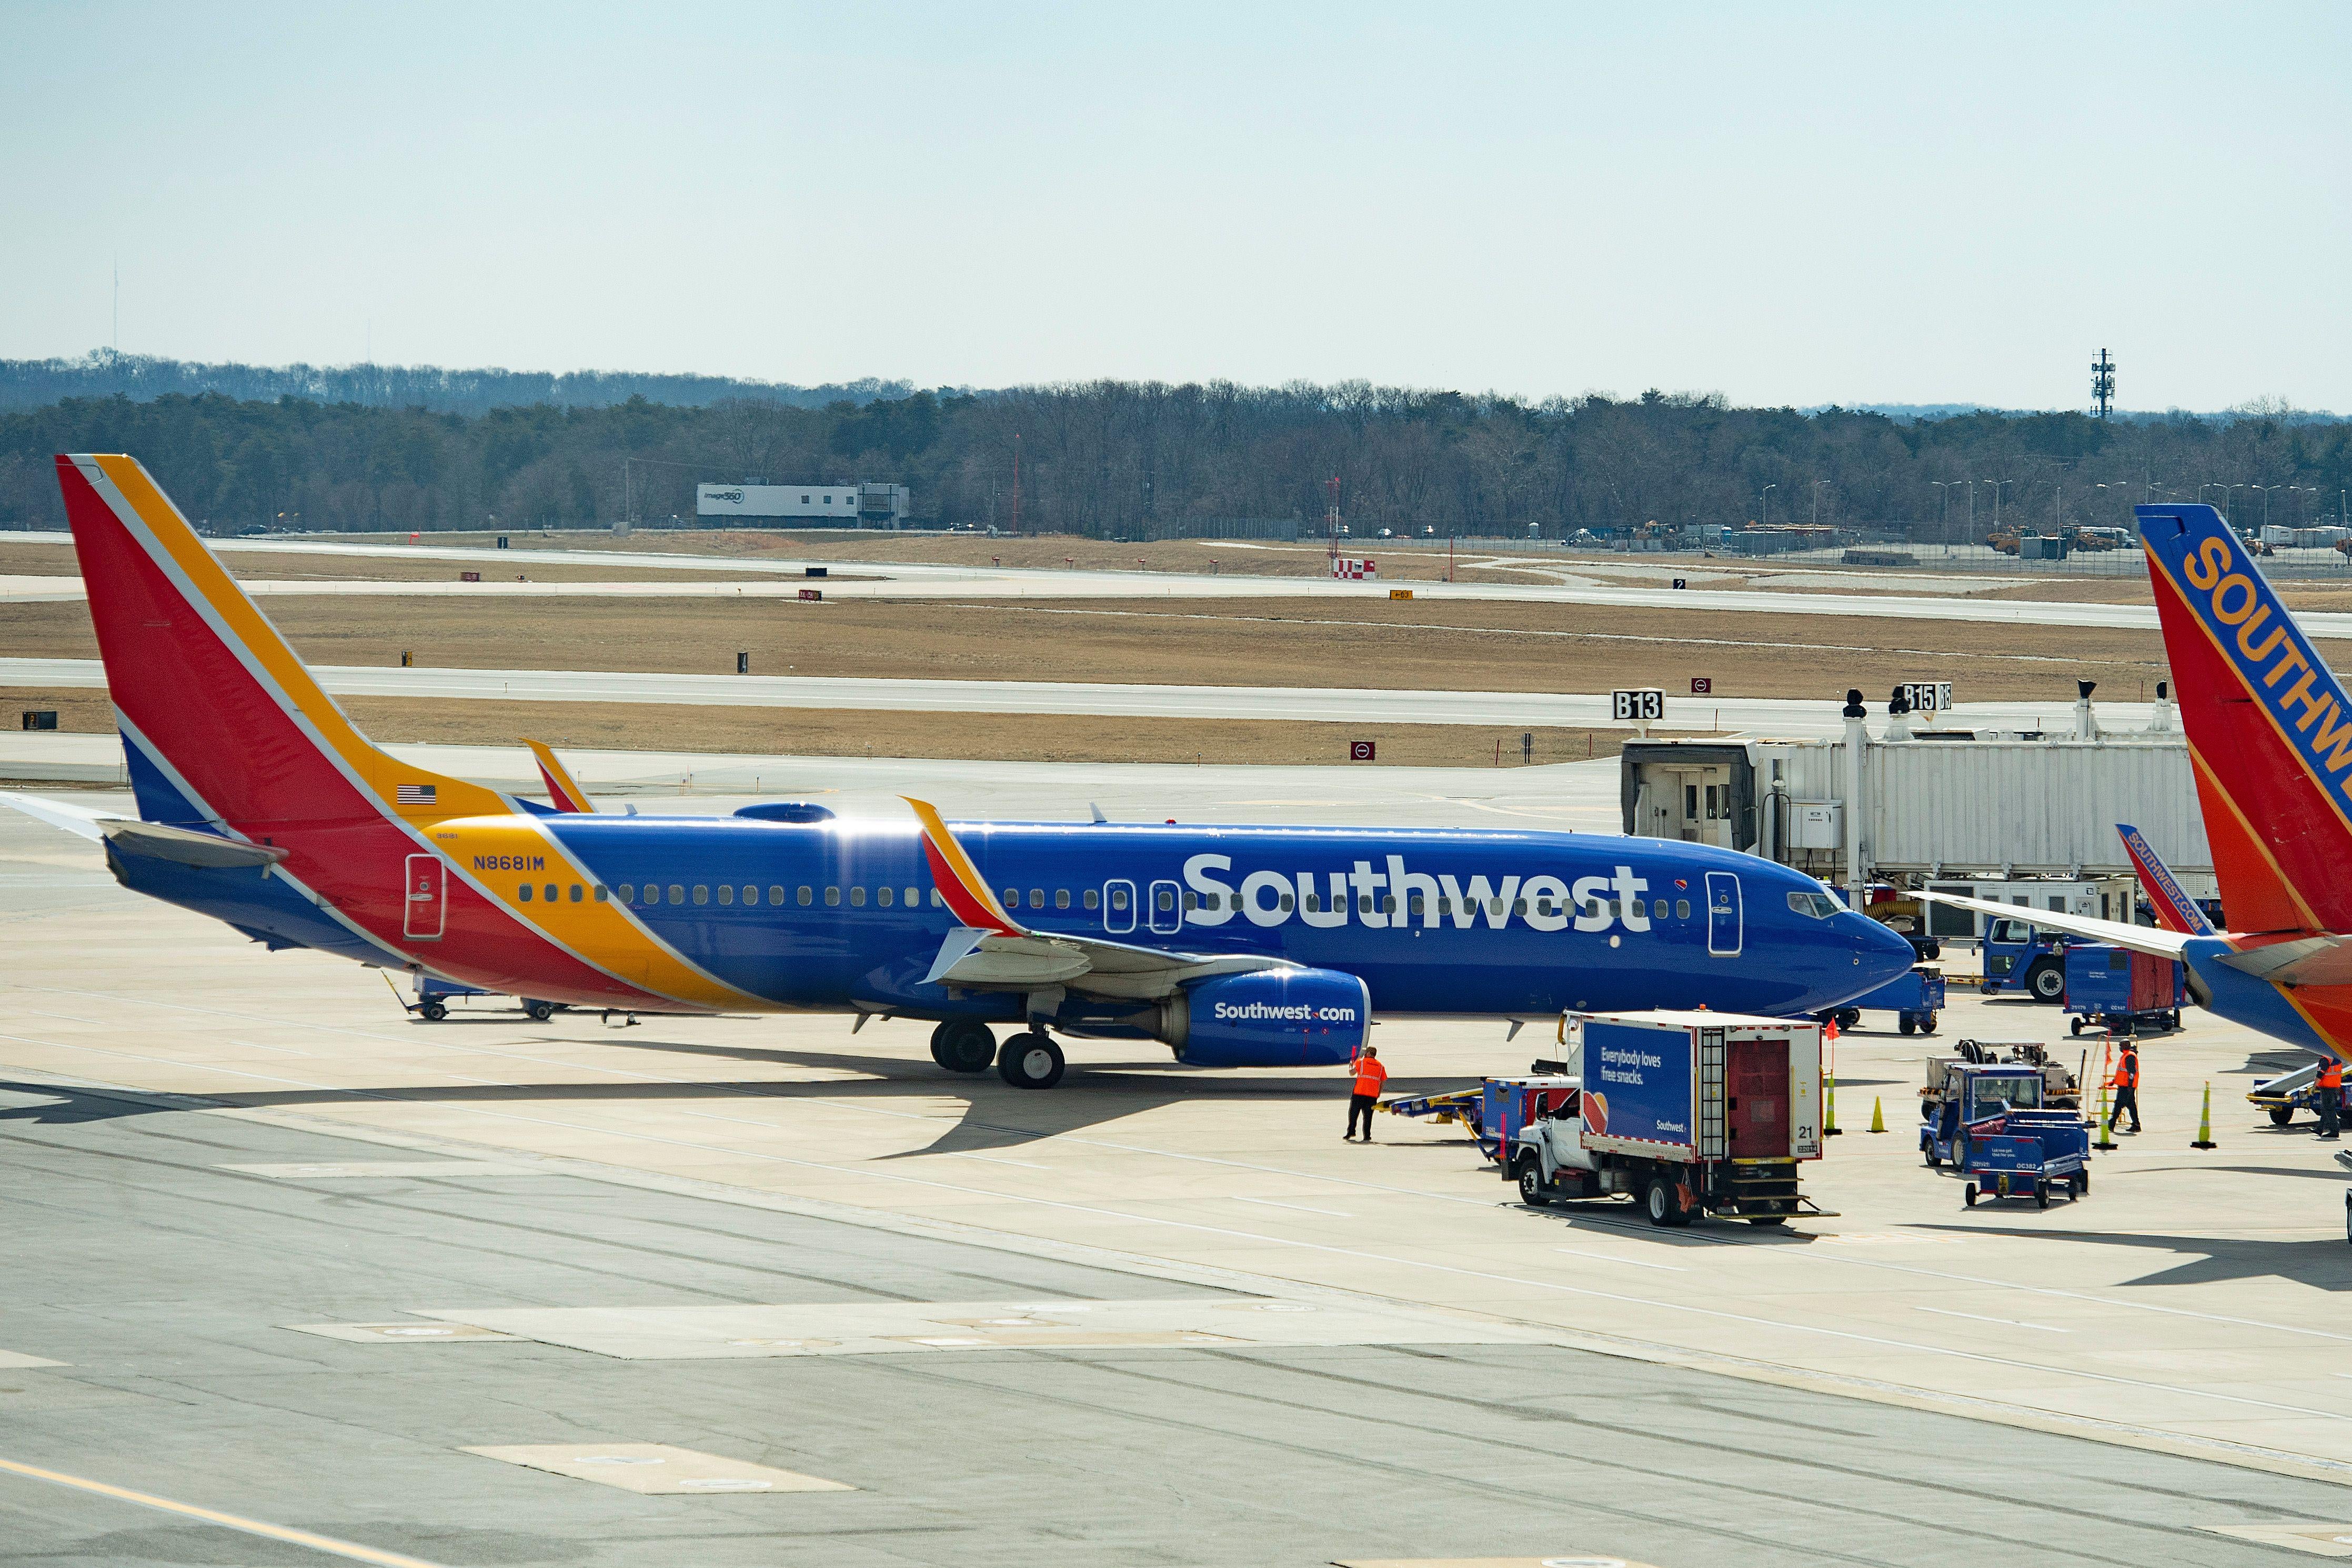 A Boeing 737 flown by Southwest Airlines taxis to the gate at BWI Airport on March 13, 2019.